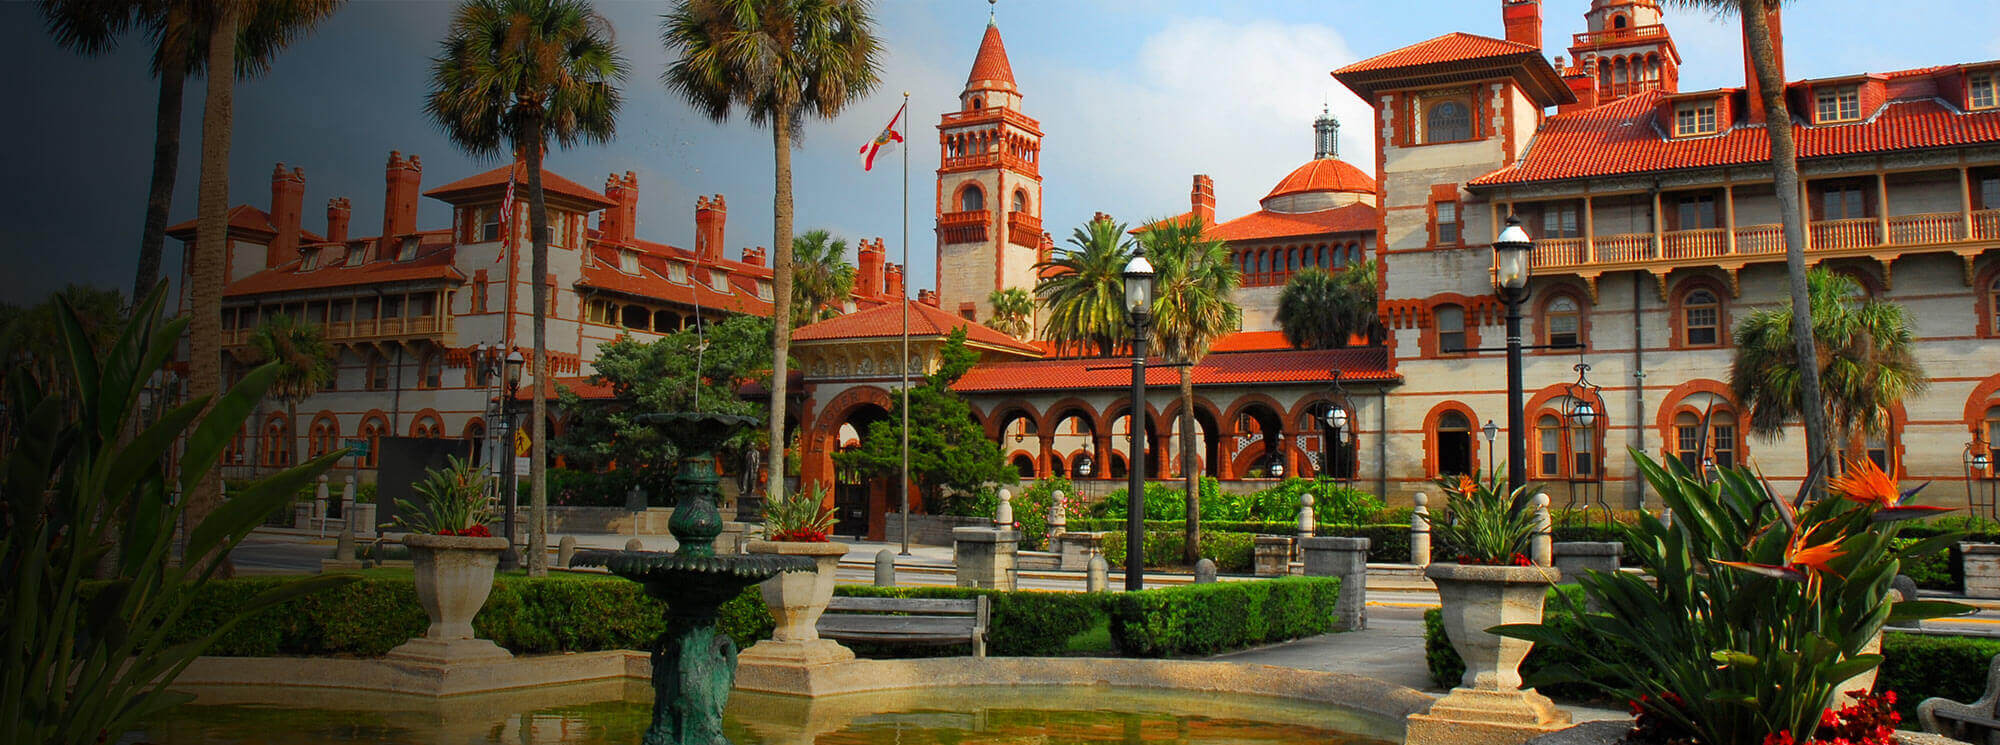 Shopping in St. Augustine - Your Guide to the Best Shopping